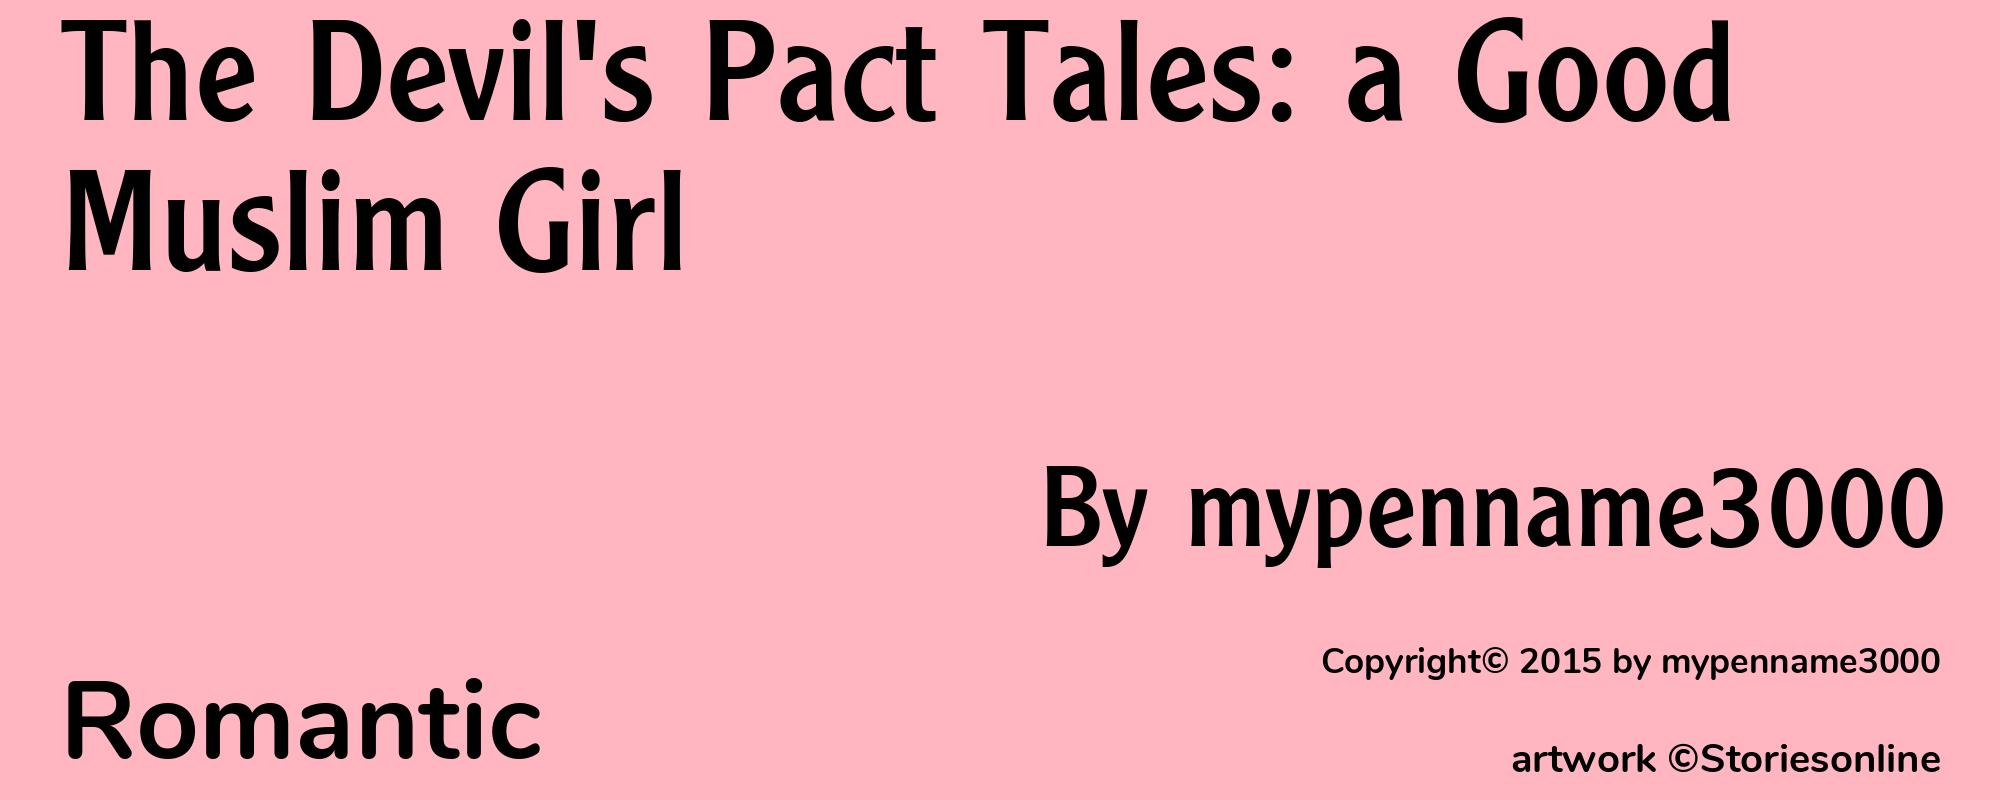 The Devil's Pact Tales: a Good Muslim Girl - Cover